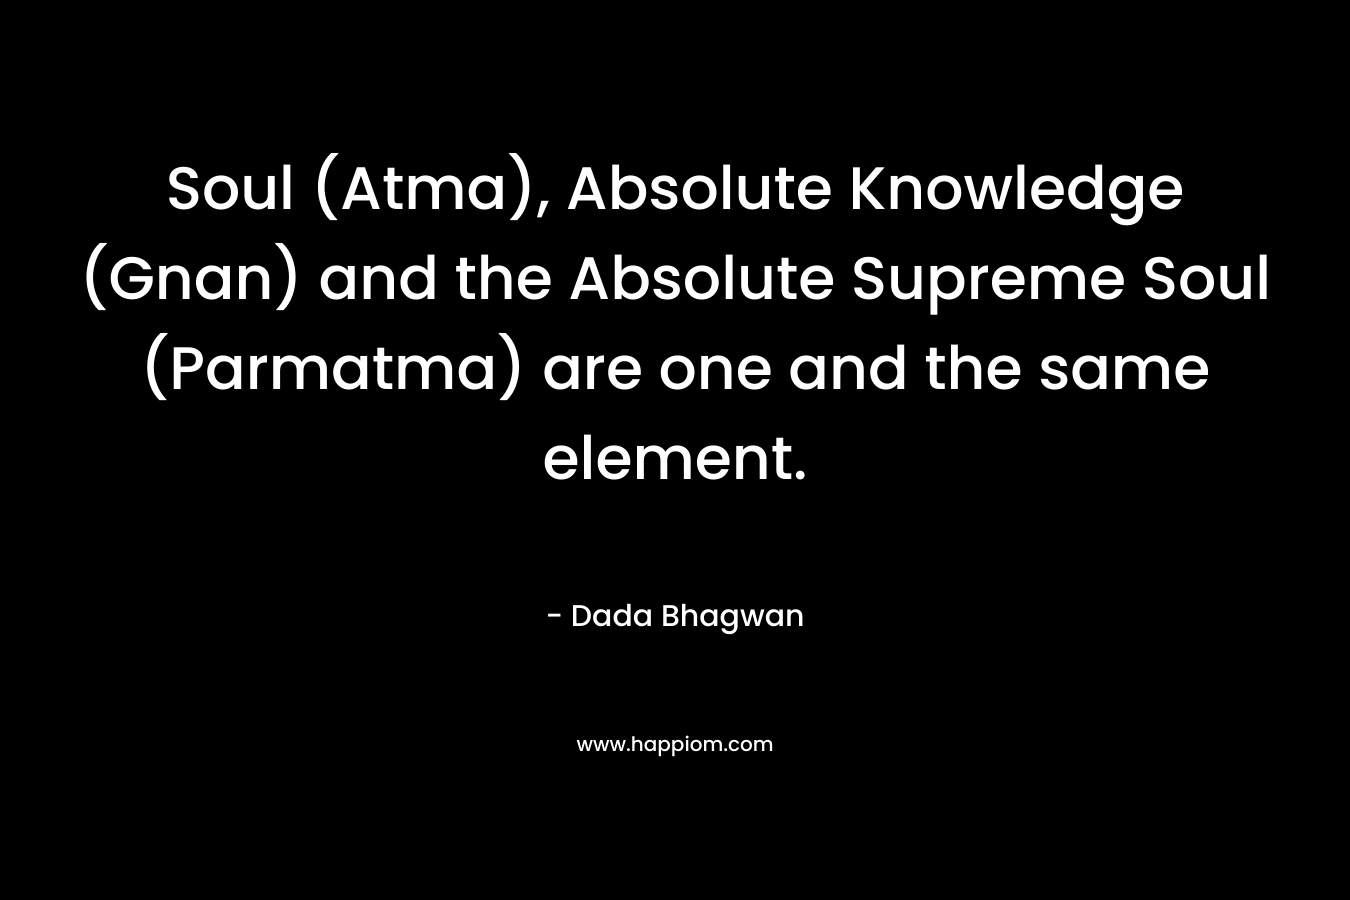 Soul (Atma), Absolute Knowledge (Gnan) and the Absolute Supreme Soul (Parmatma) are one and the same element. – Dada Bhagwan